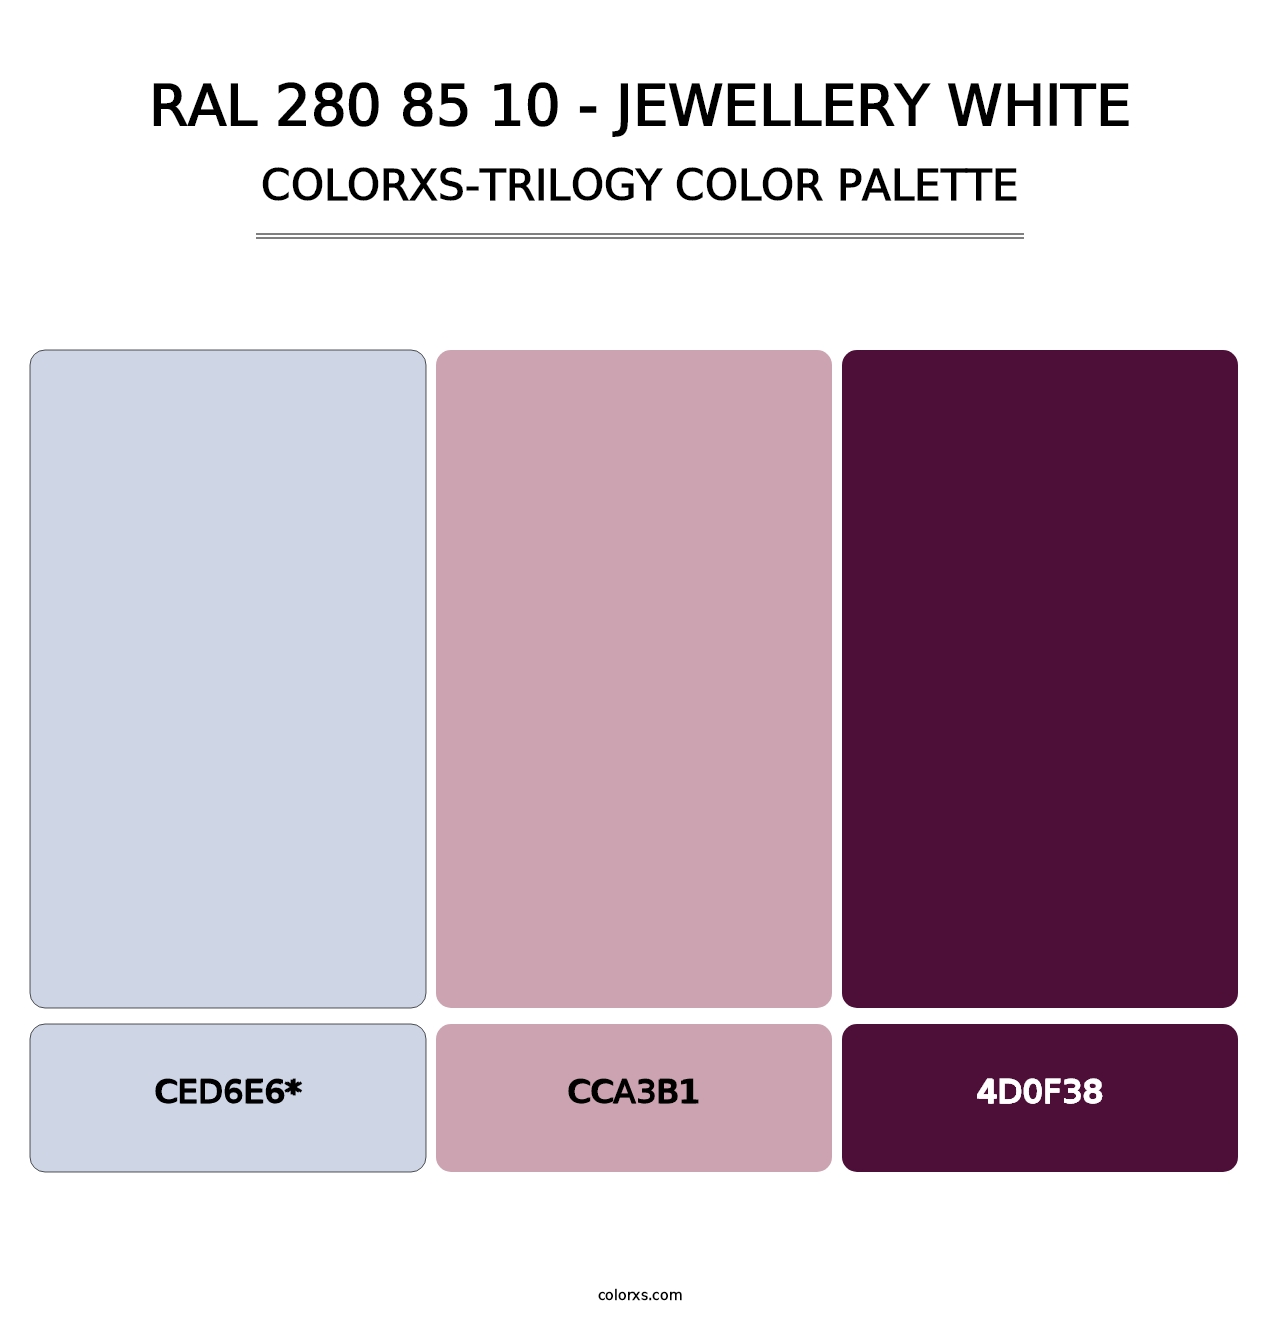 RAL 280 85 10 - Jewellery White - Colorxs Trilogy Palette